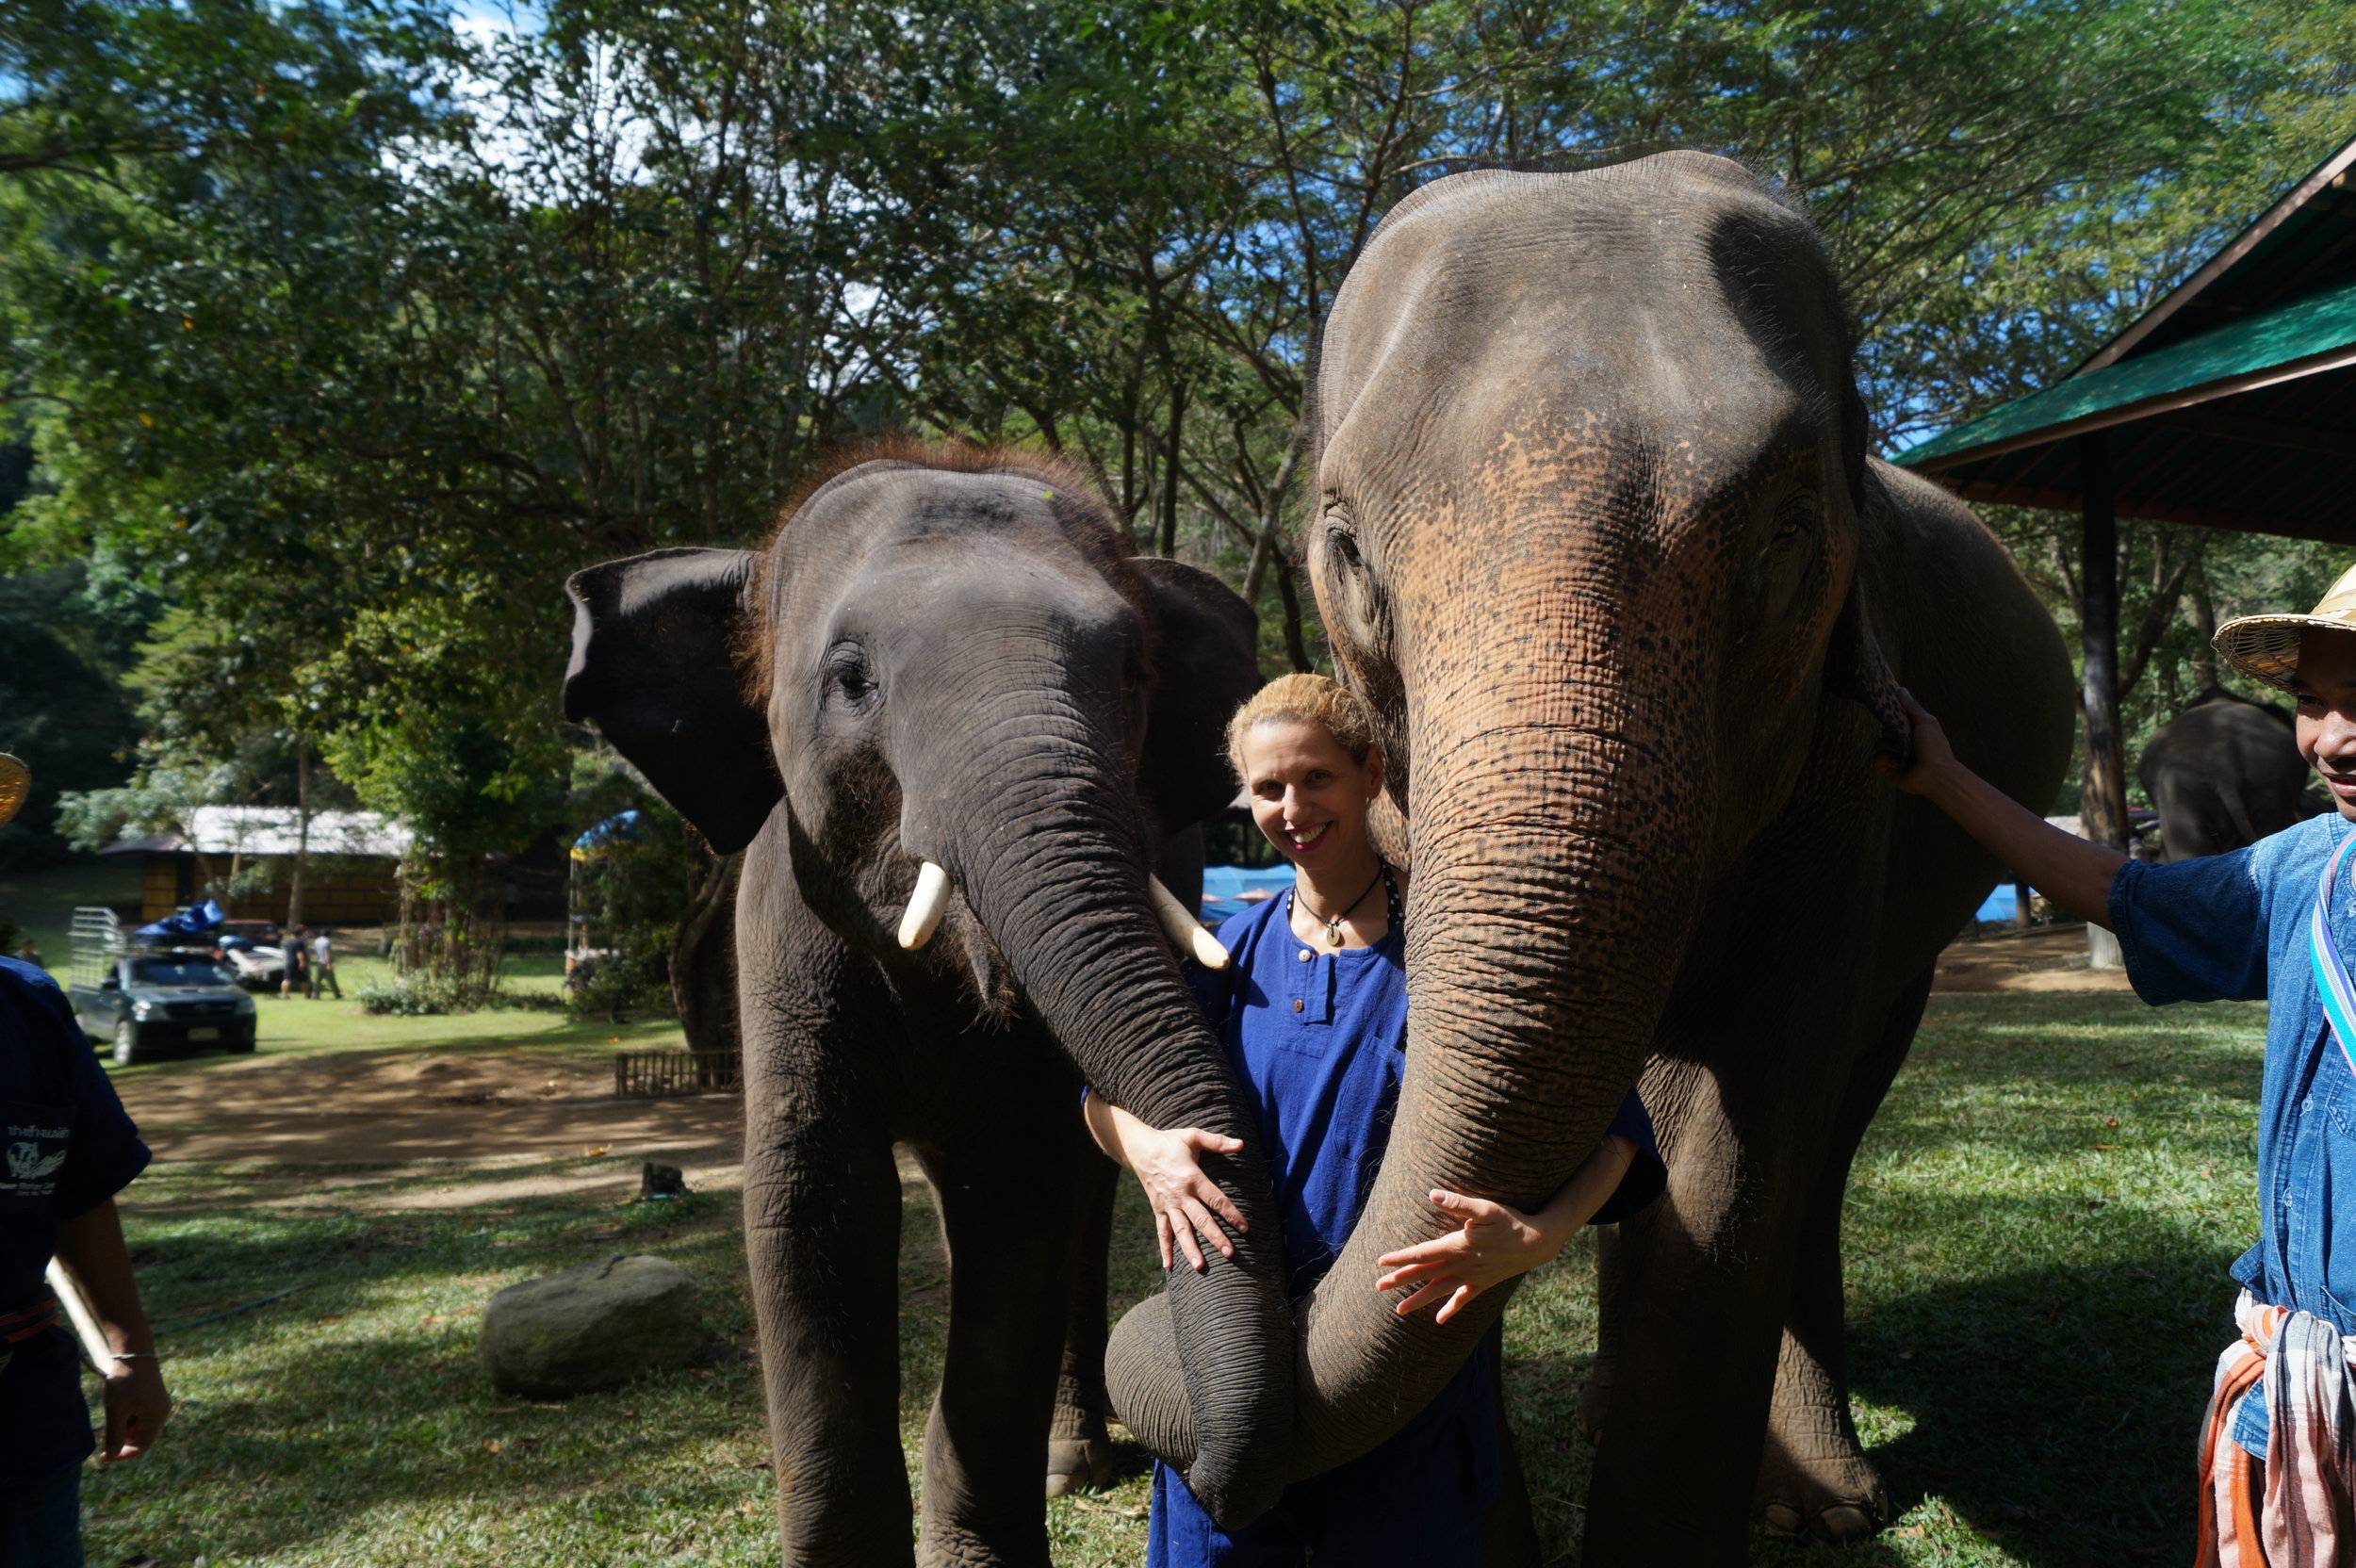 I really bonded with the two elephants we spent the day with. 